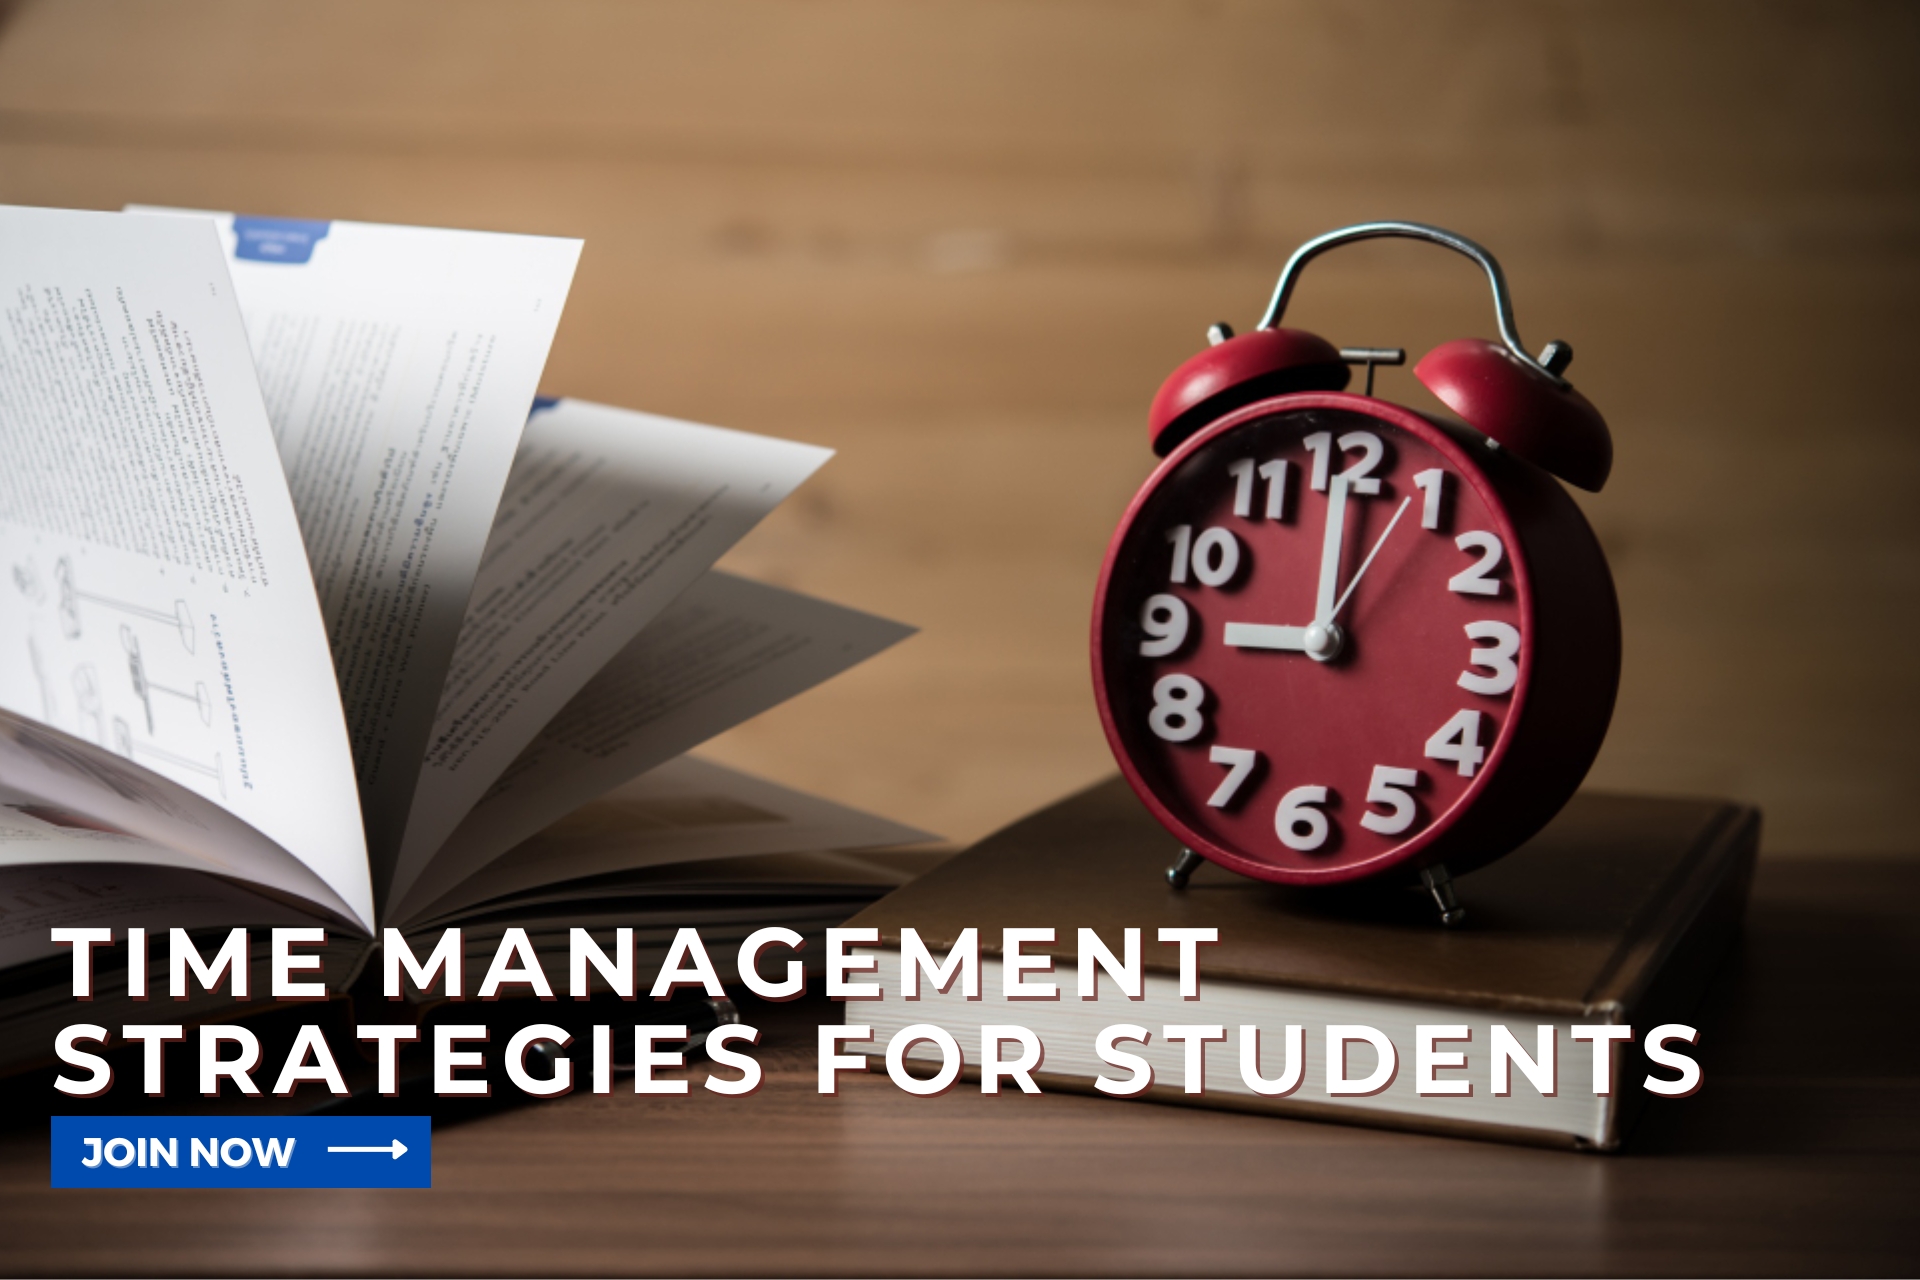 Time management strategies for students